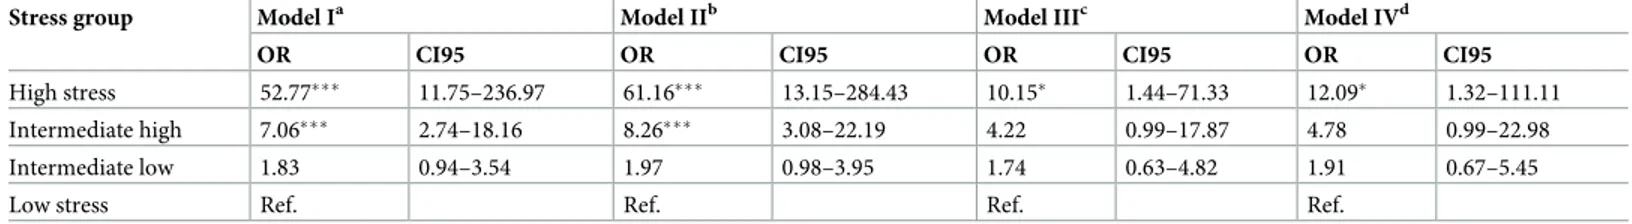 Table 6. Effect of stress on short sleep duration. Multivariate hierarchical logistic regression analysis.